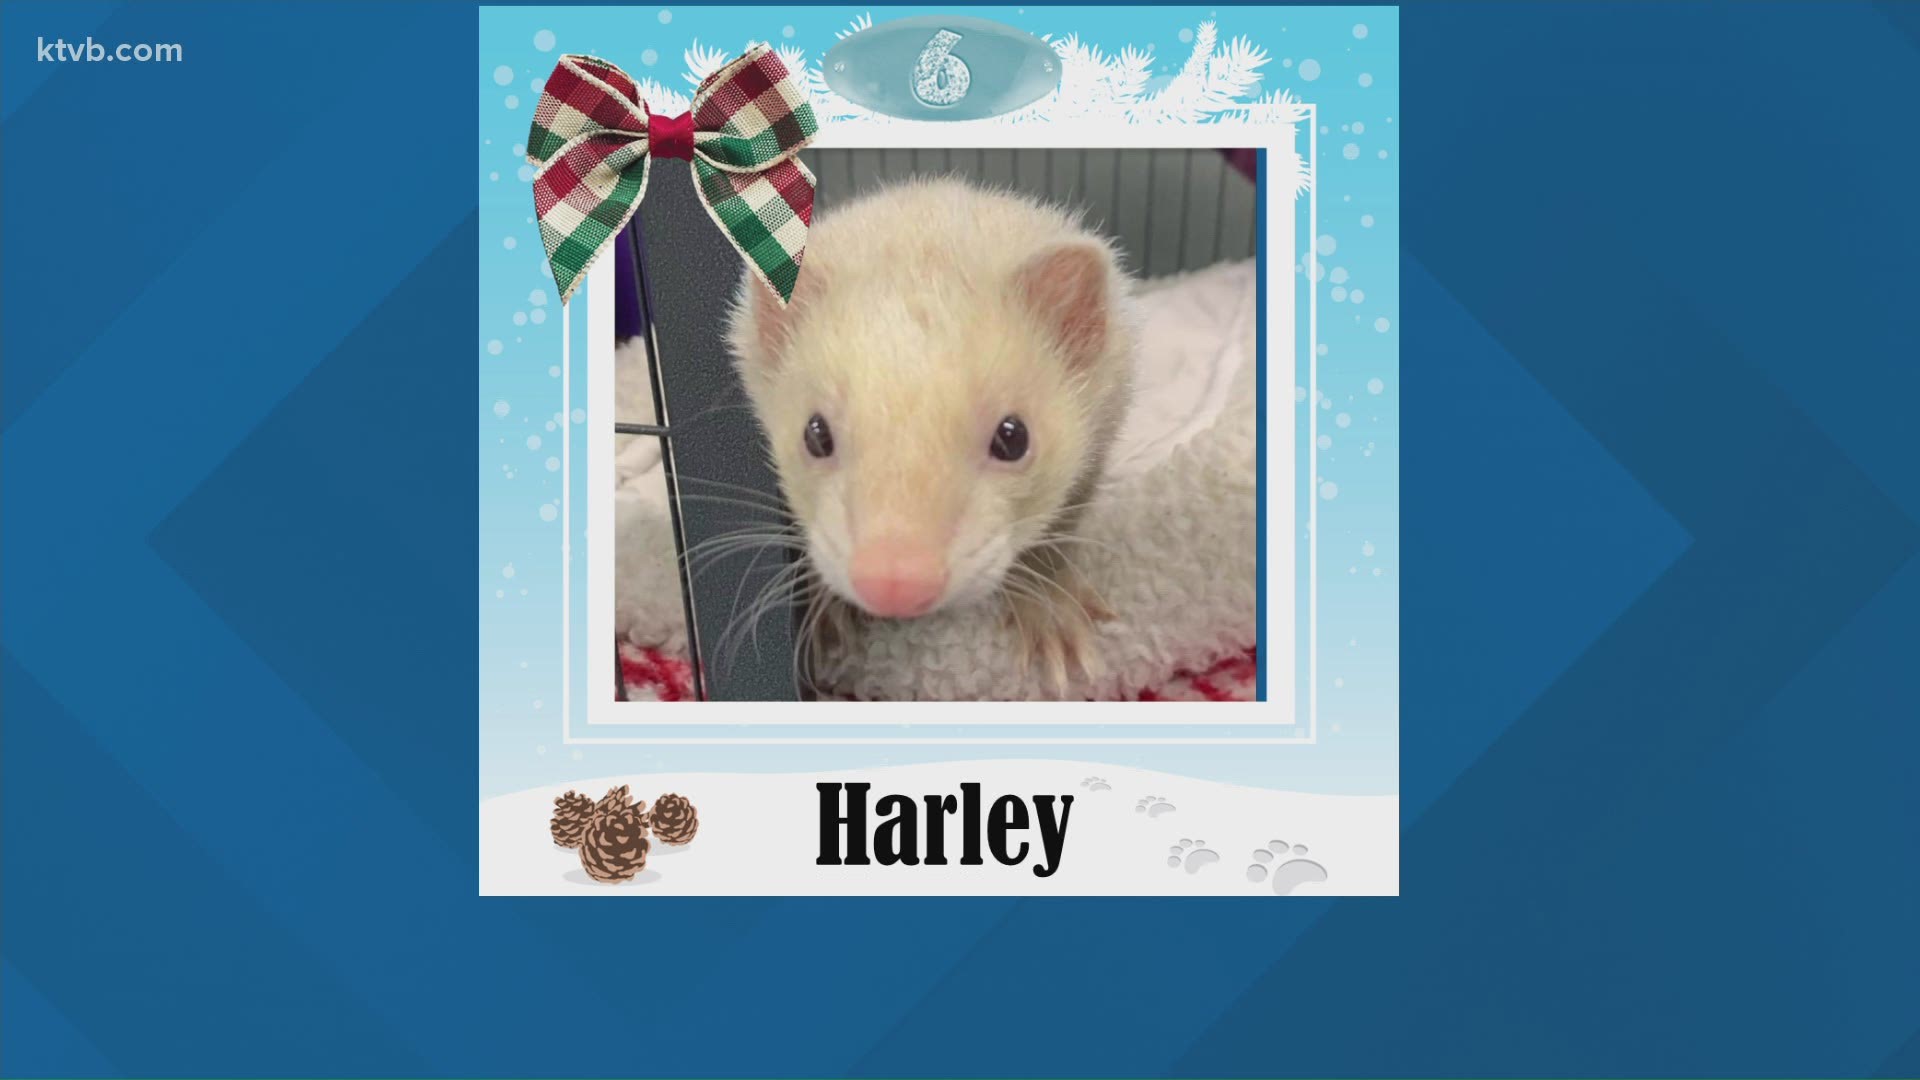 Harley is very sweet, curious and likes to play with kids.